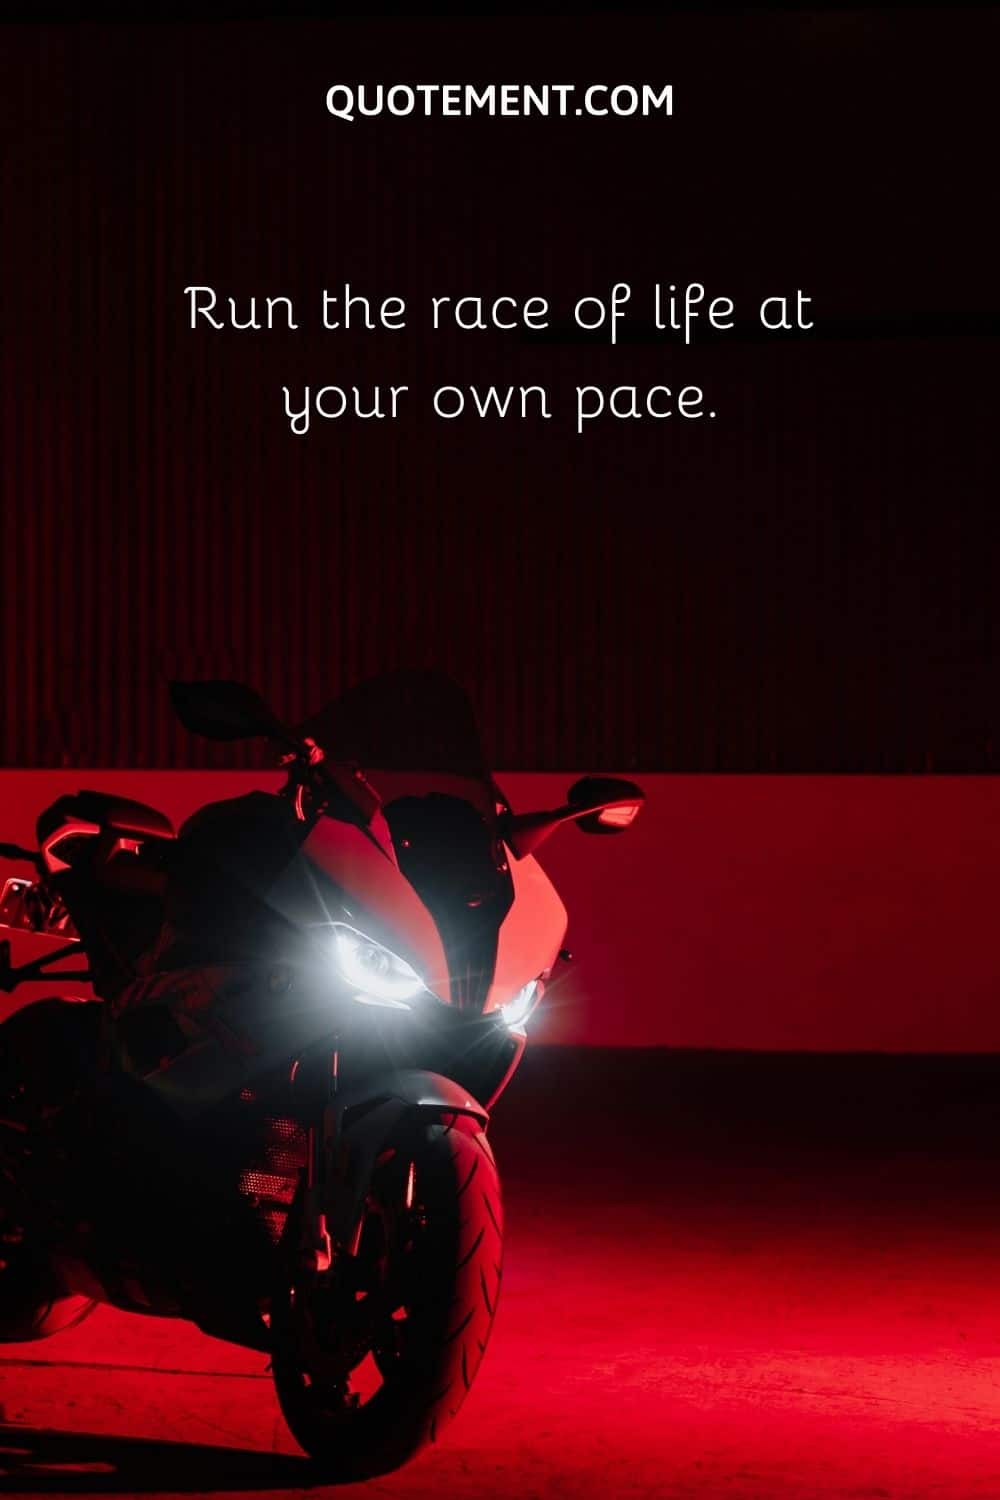 Run the race of life at your own pace.